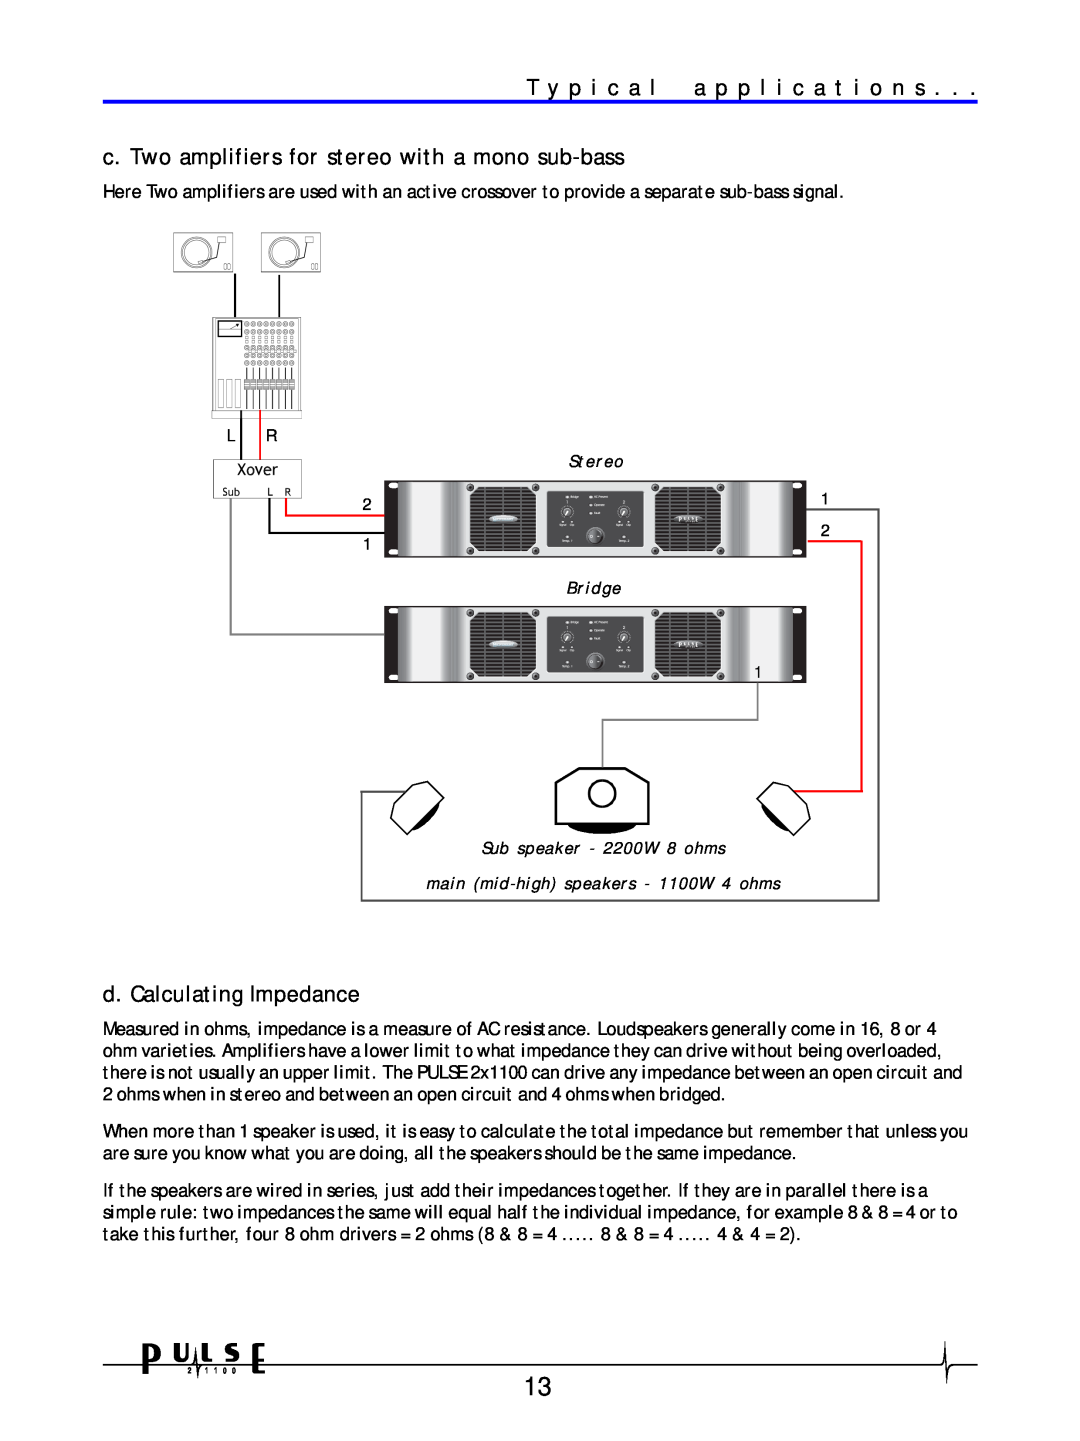 Crown Audio 21100 user manual c. Two amplifiers for stereo with a mono sub-bass, d. Calculating Impedance 